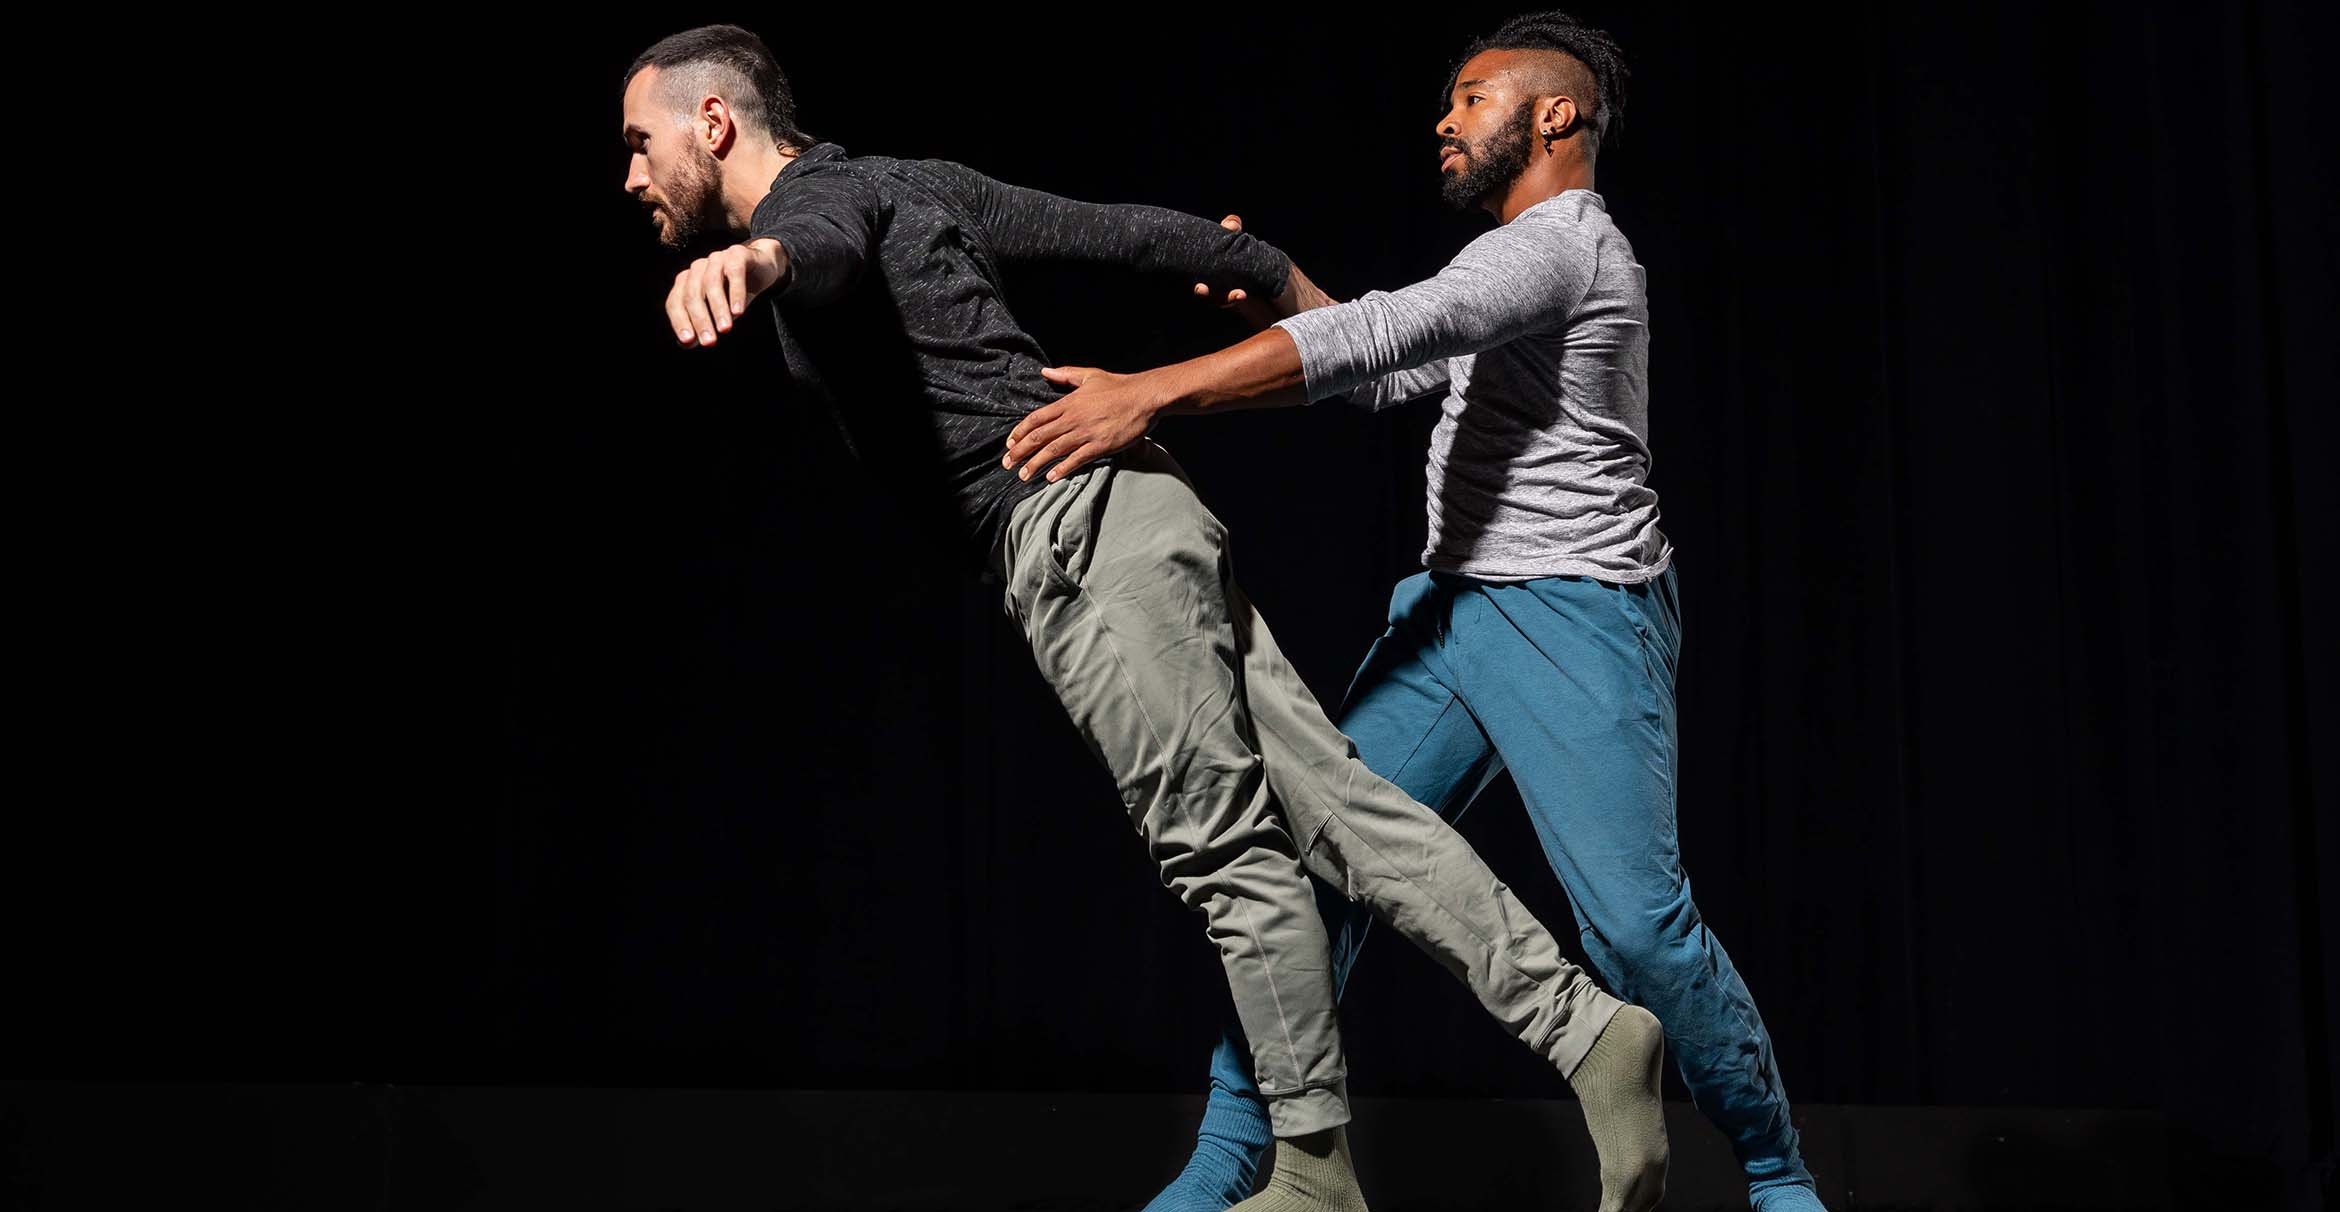 Two male dancers perform on a blackened stage